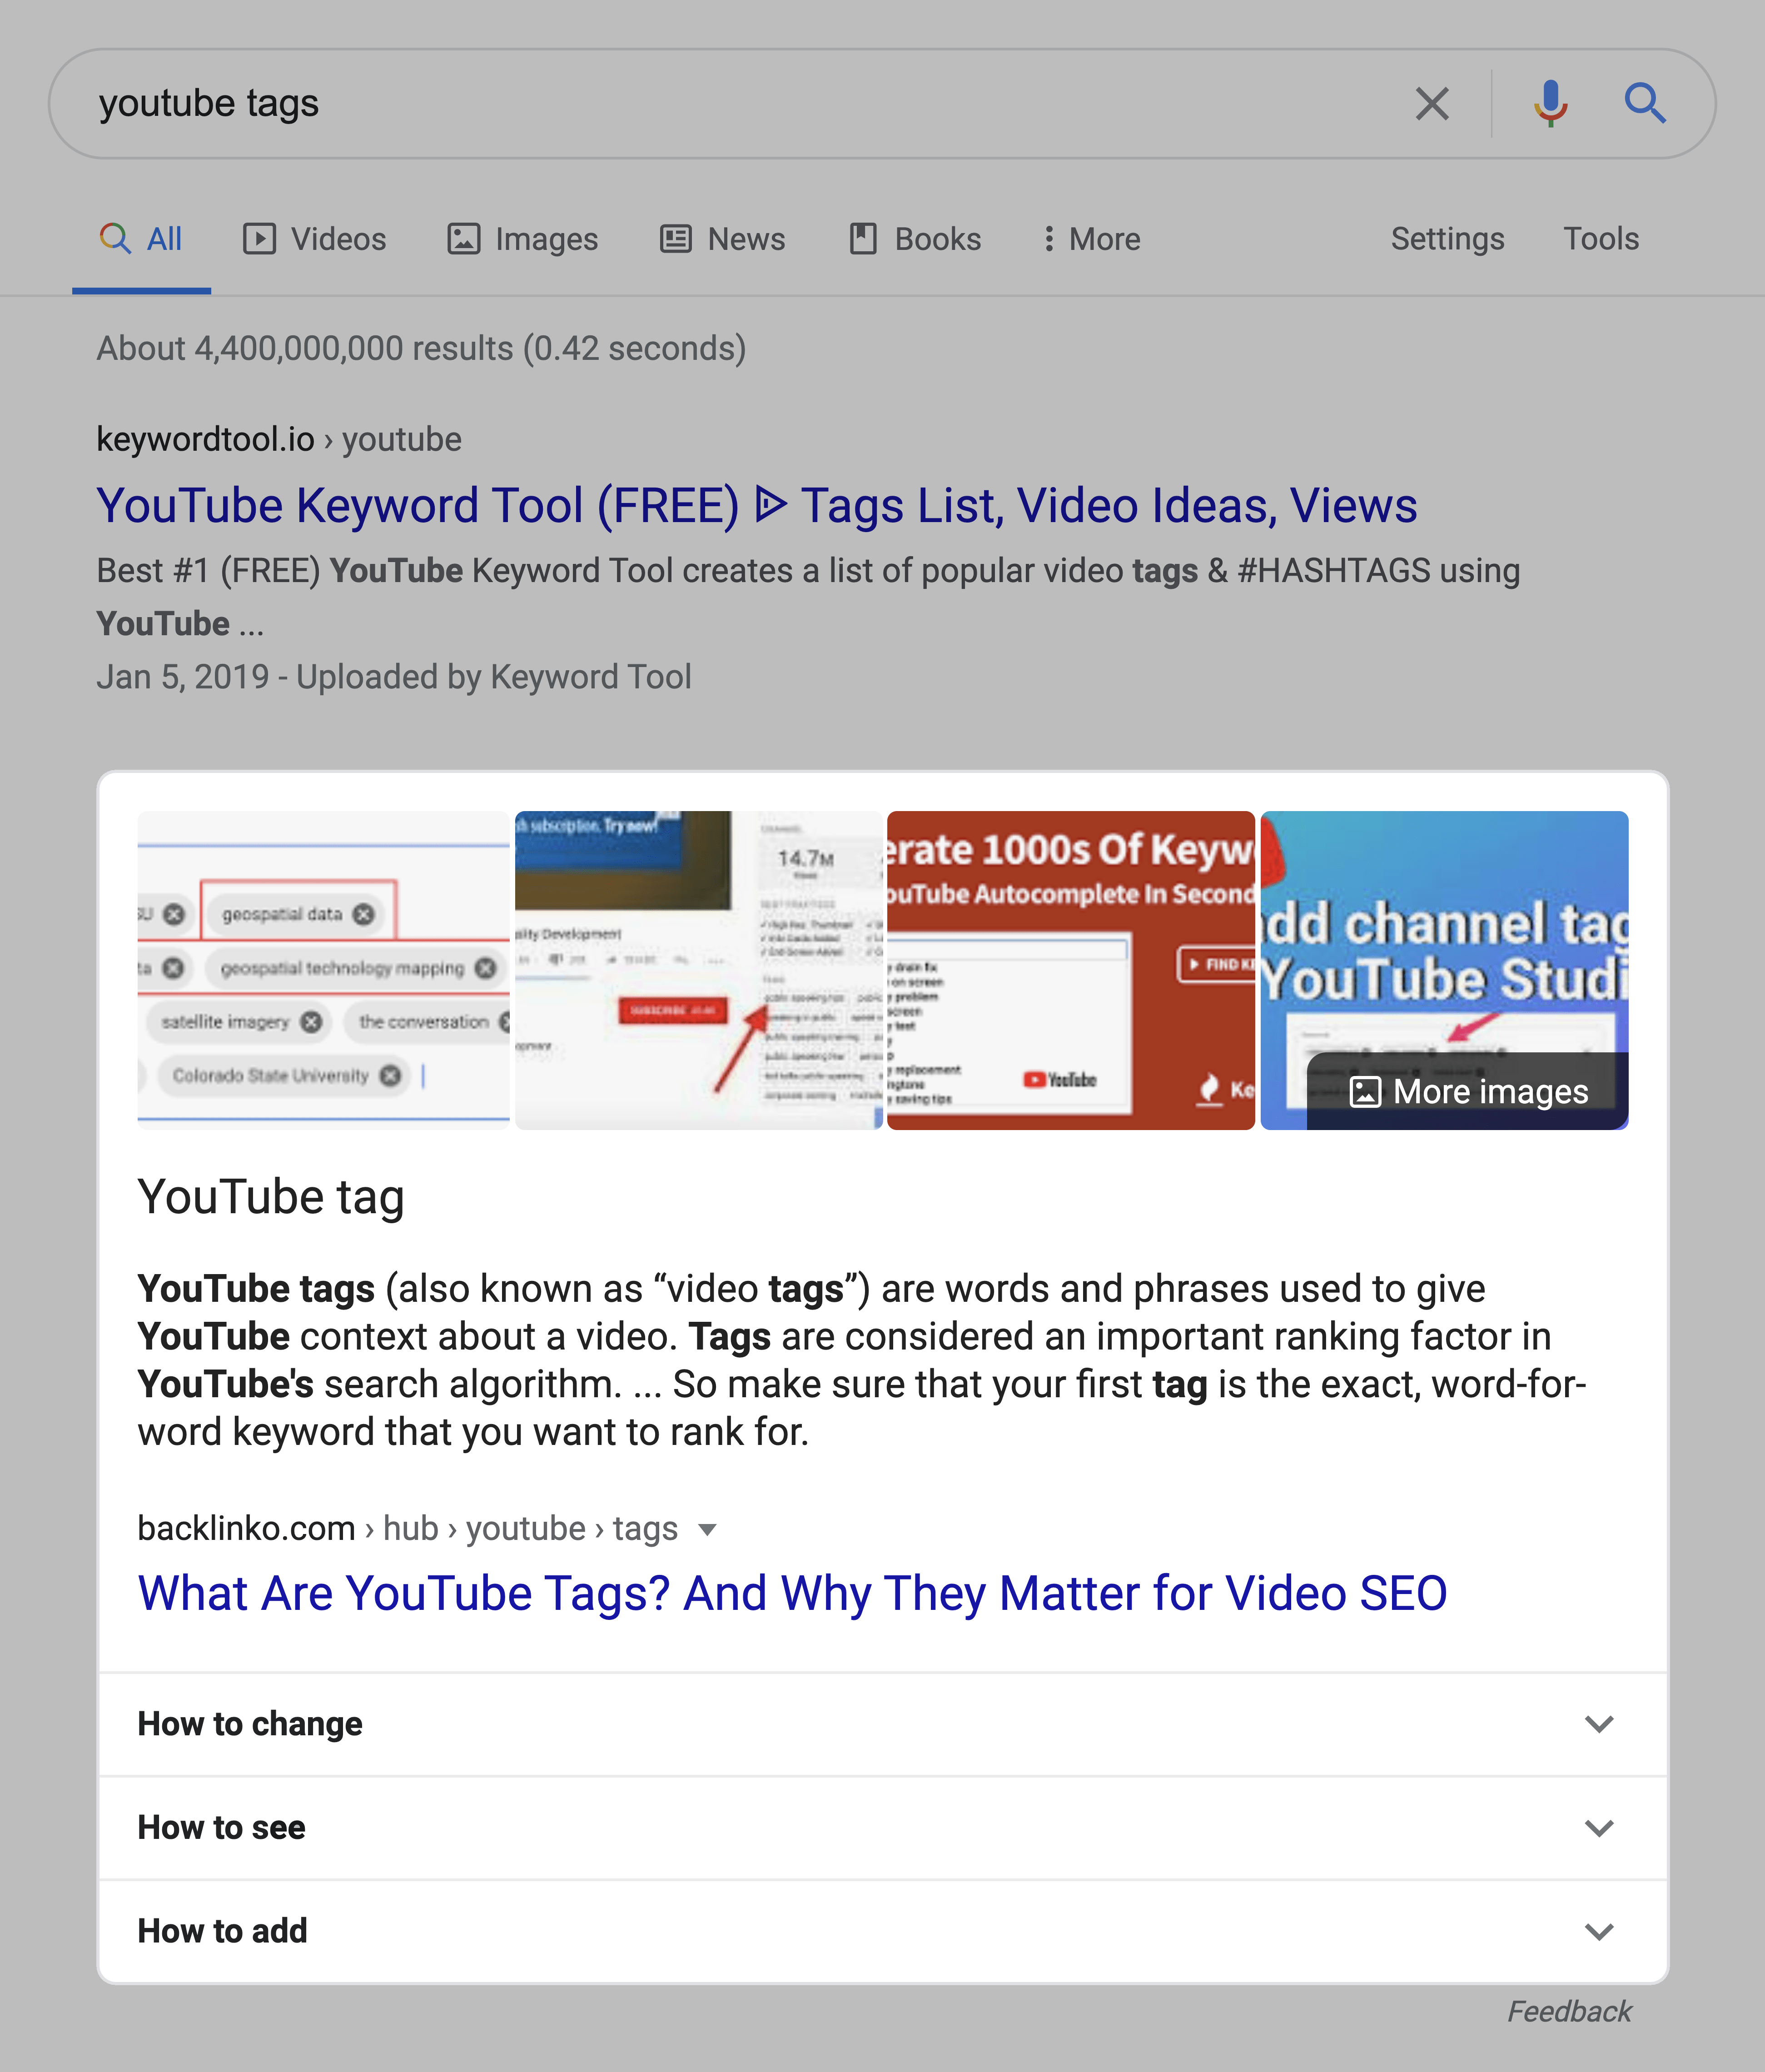 Featured Snippet Within Search Results